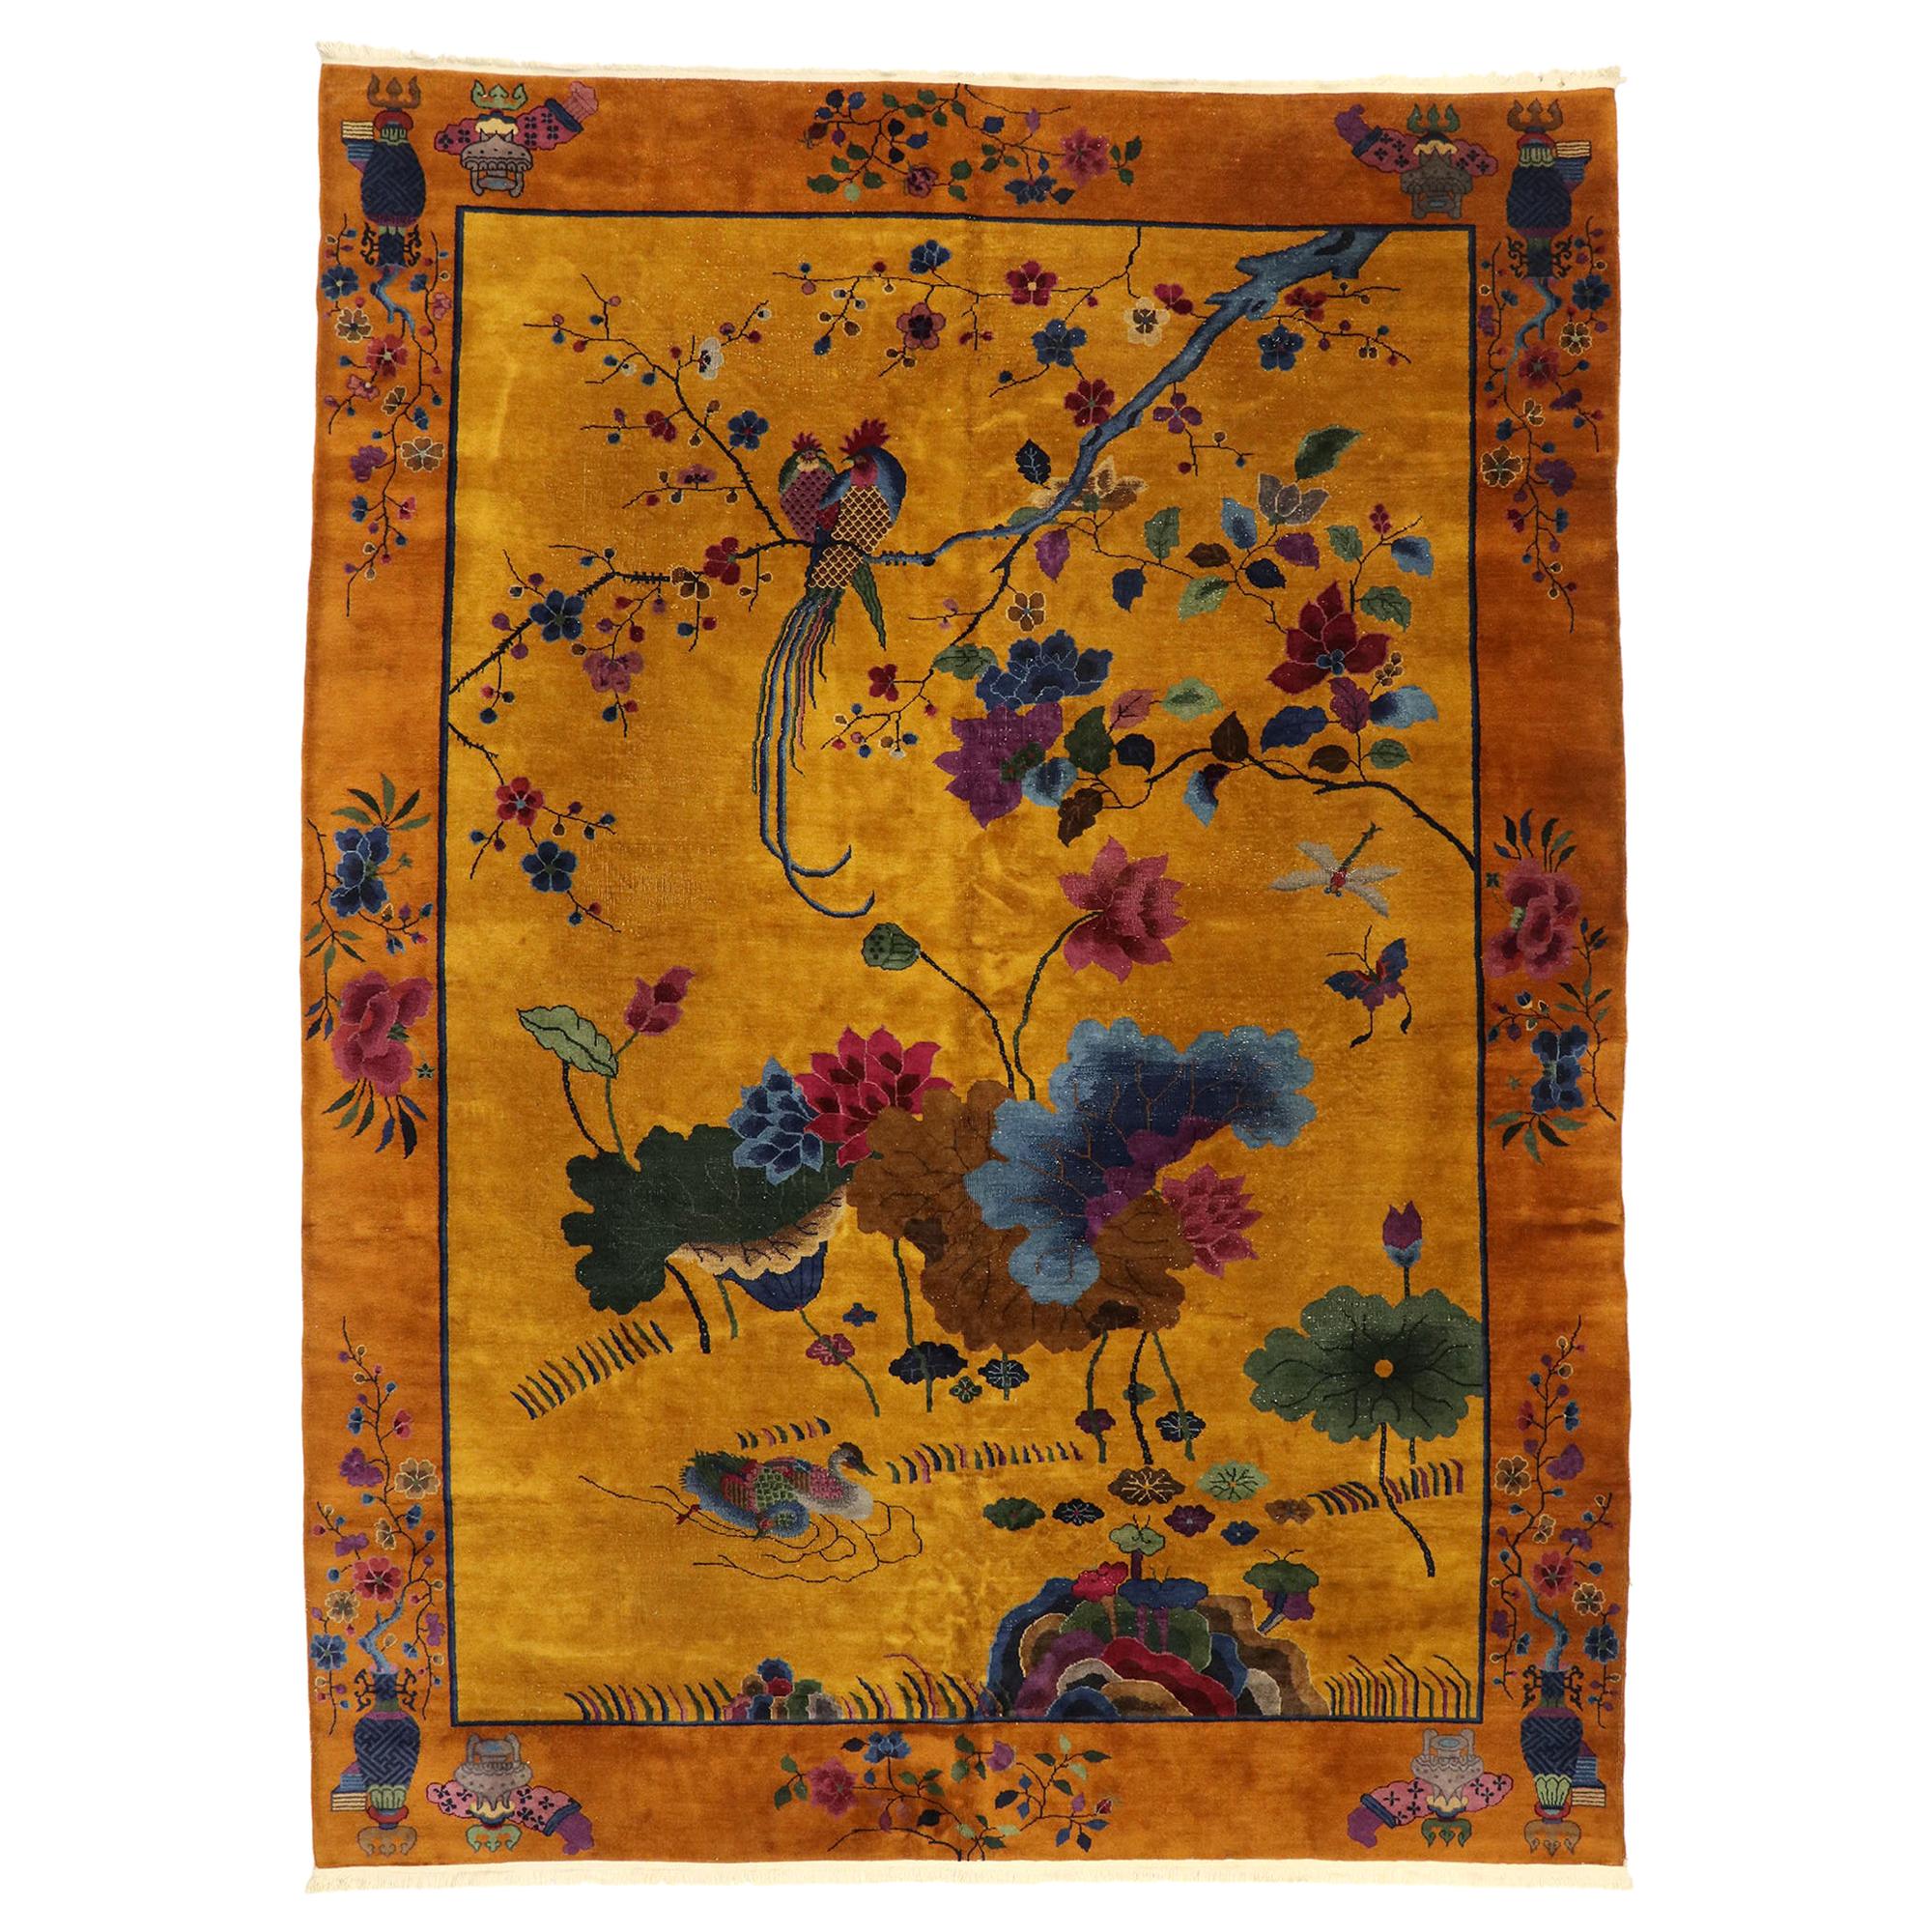 Antique Chinese Pictorial Rug with Art Deco Style